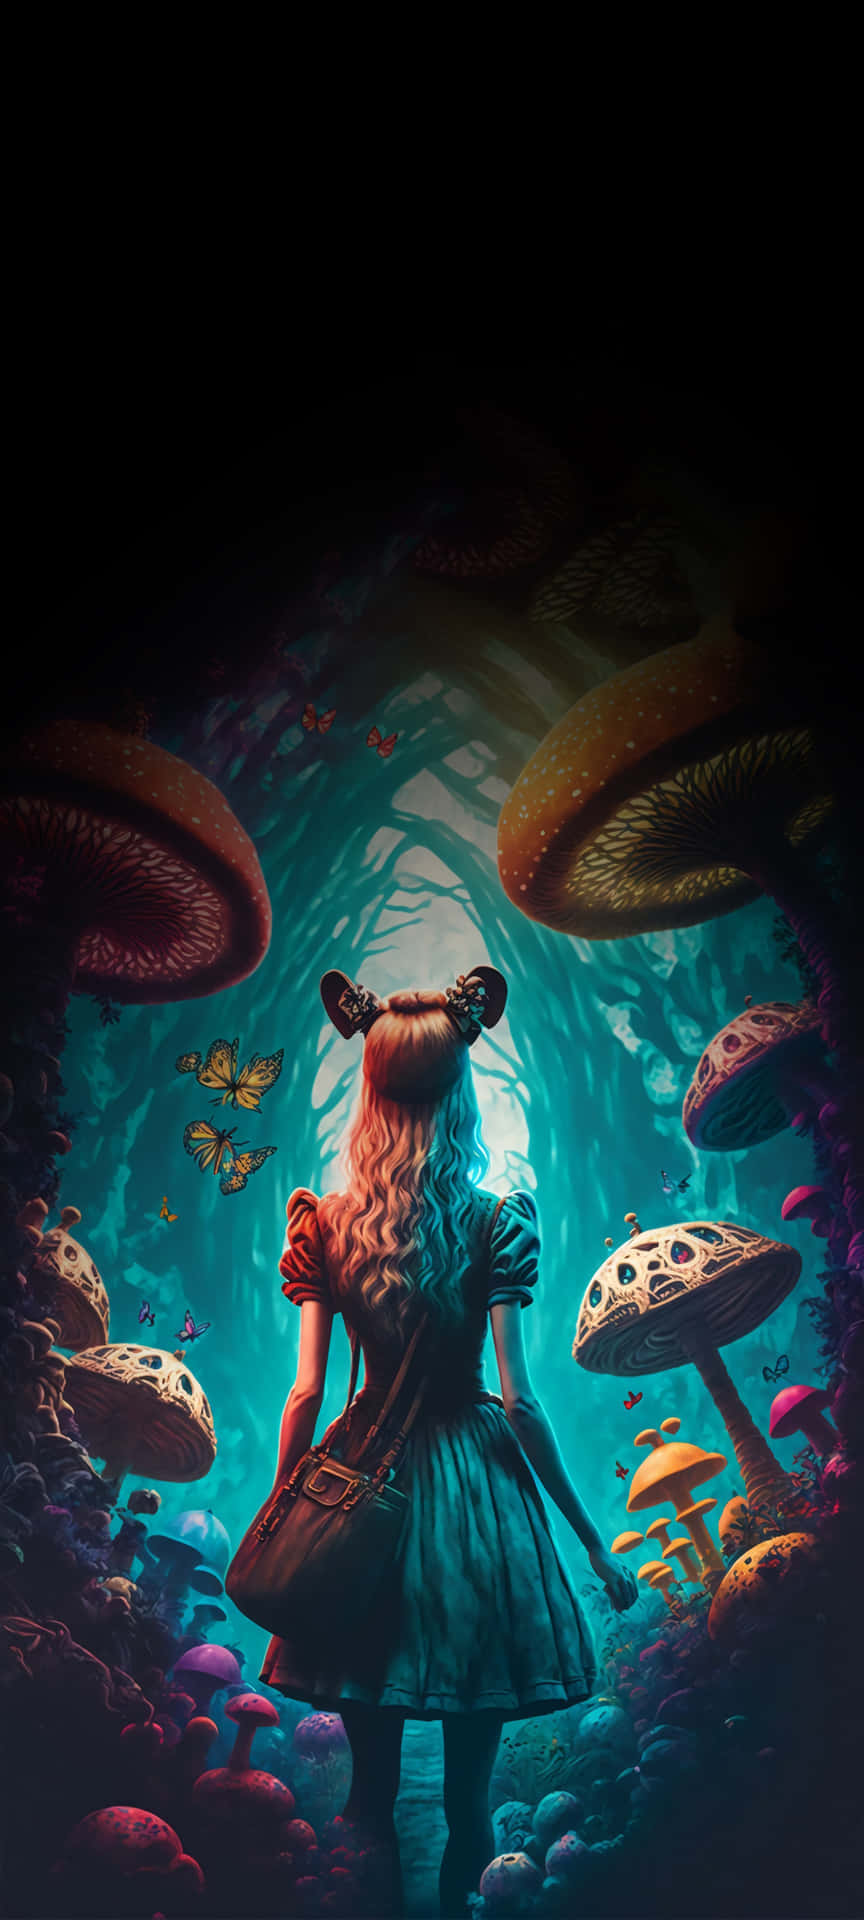 Follow Alice and venture into the world of Wonderland.